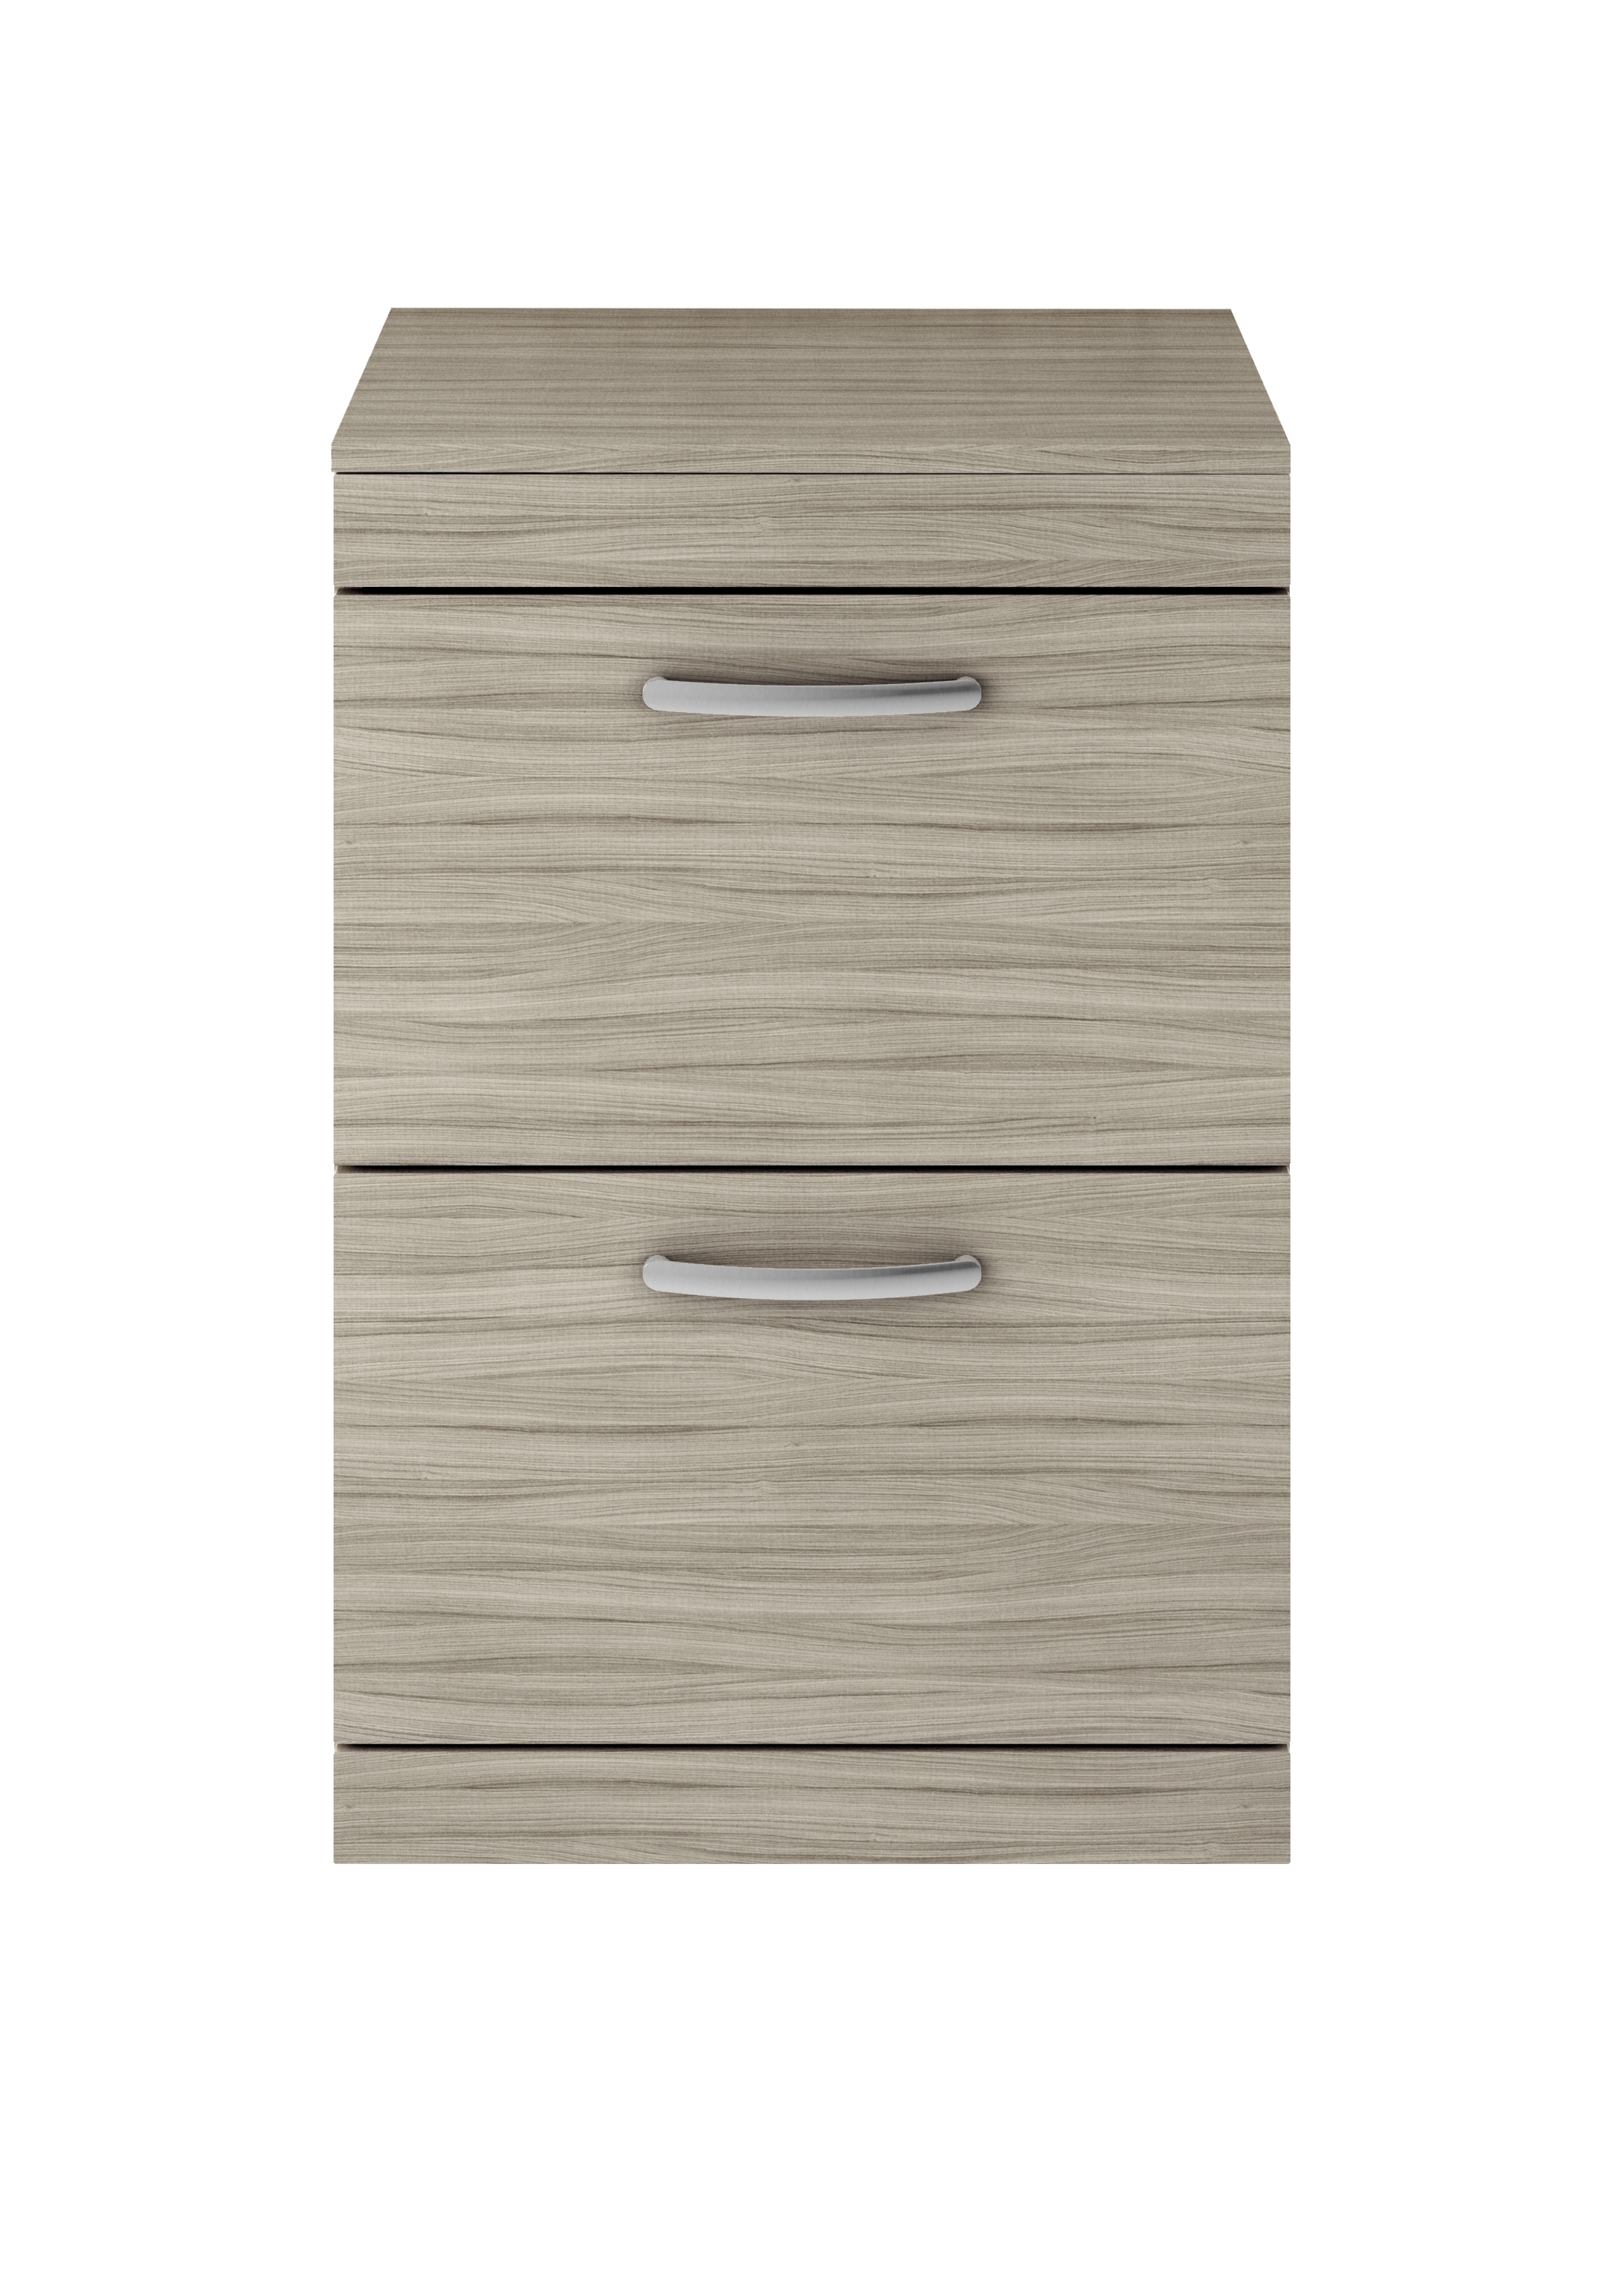 Nuie Athena Driftwood Contemporary 600 Floor Standing 2-Drawer Vanity With Worktop - ATH029W 